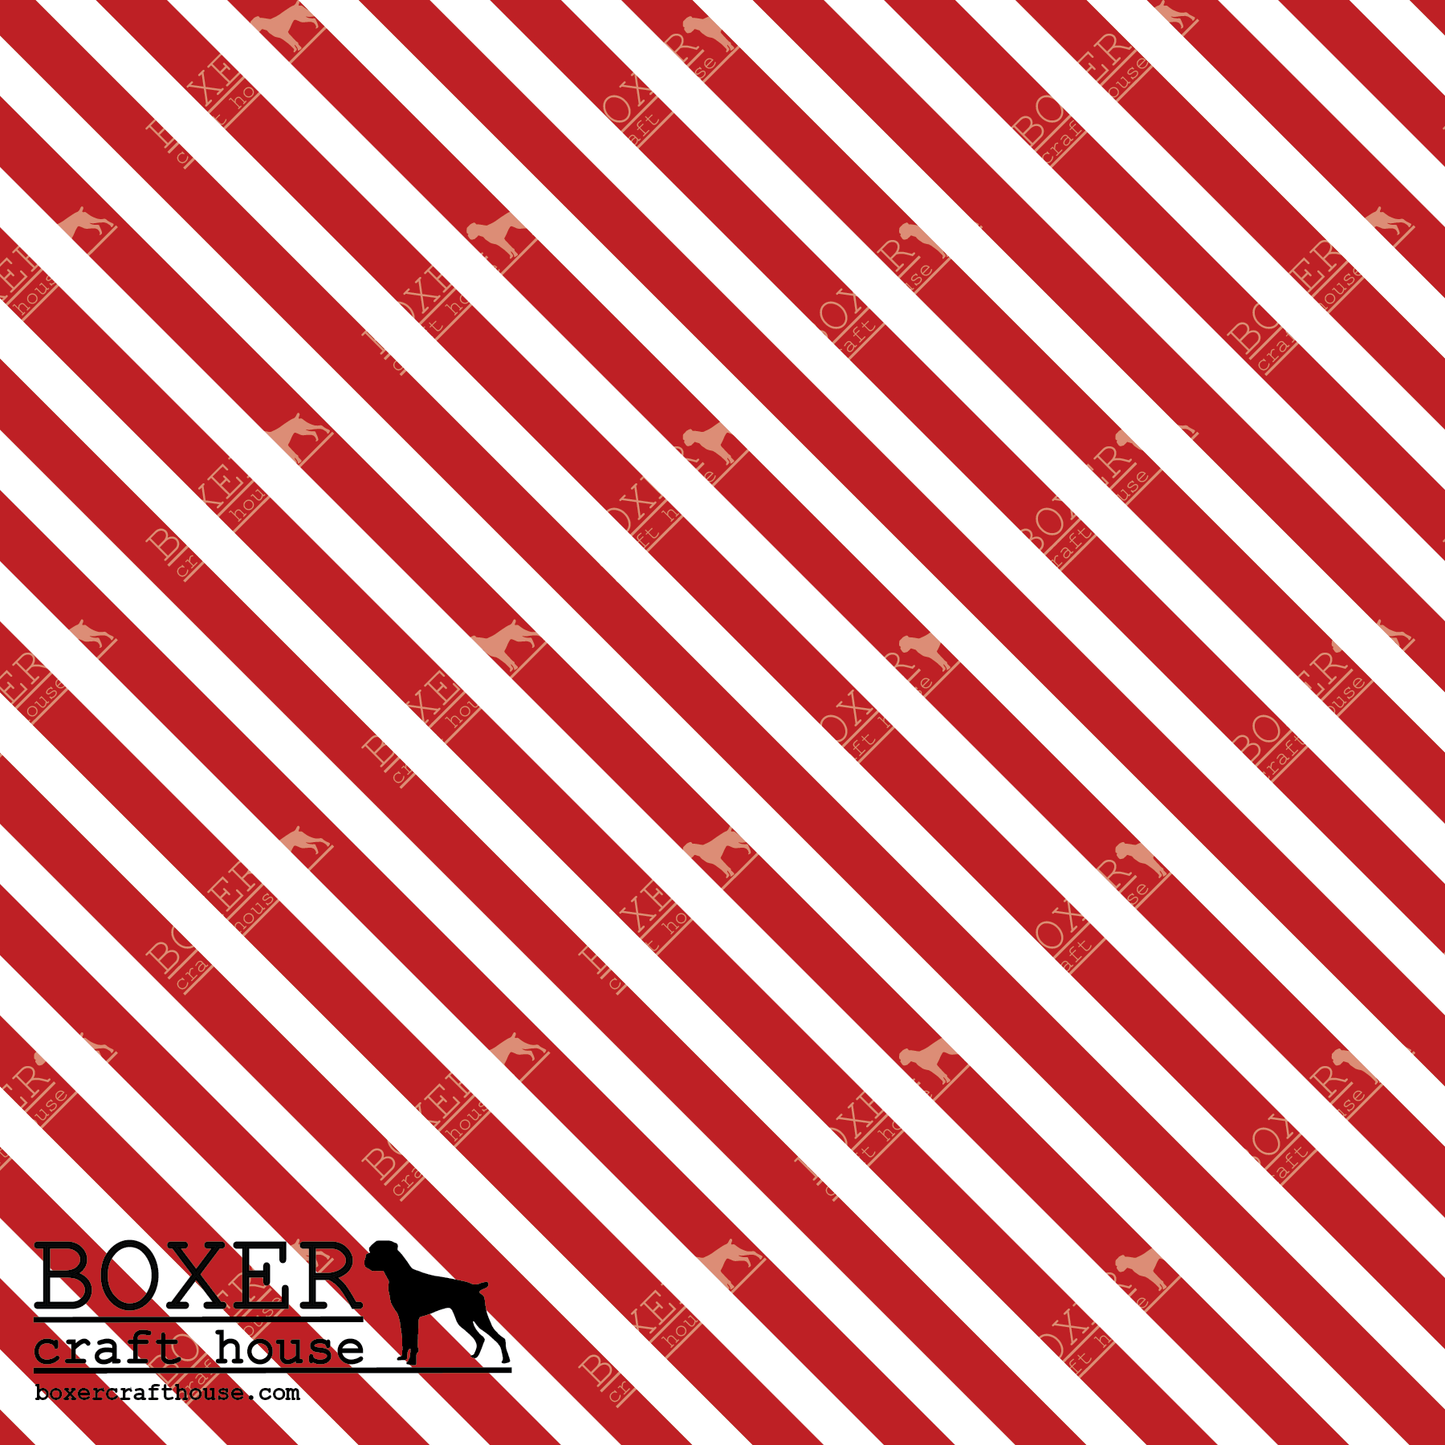 Reindeer Games - Candy Cane Stripes